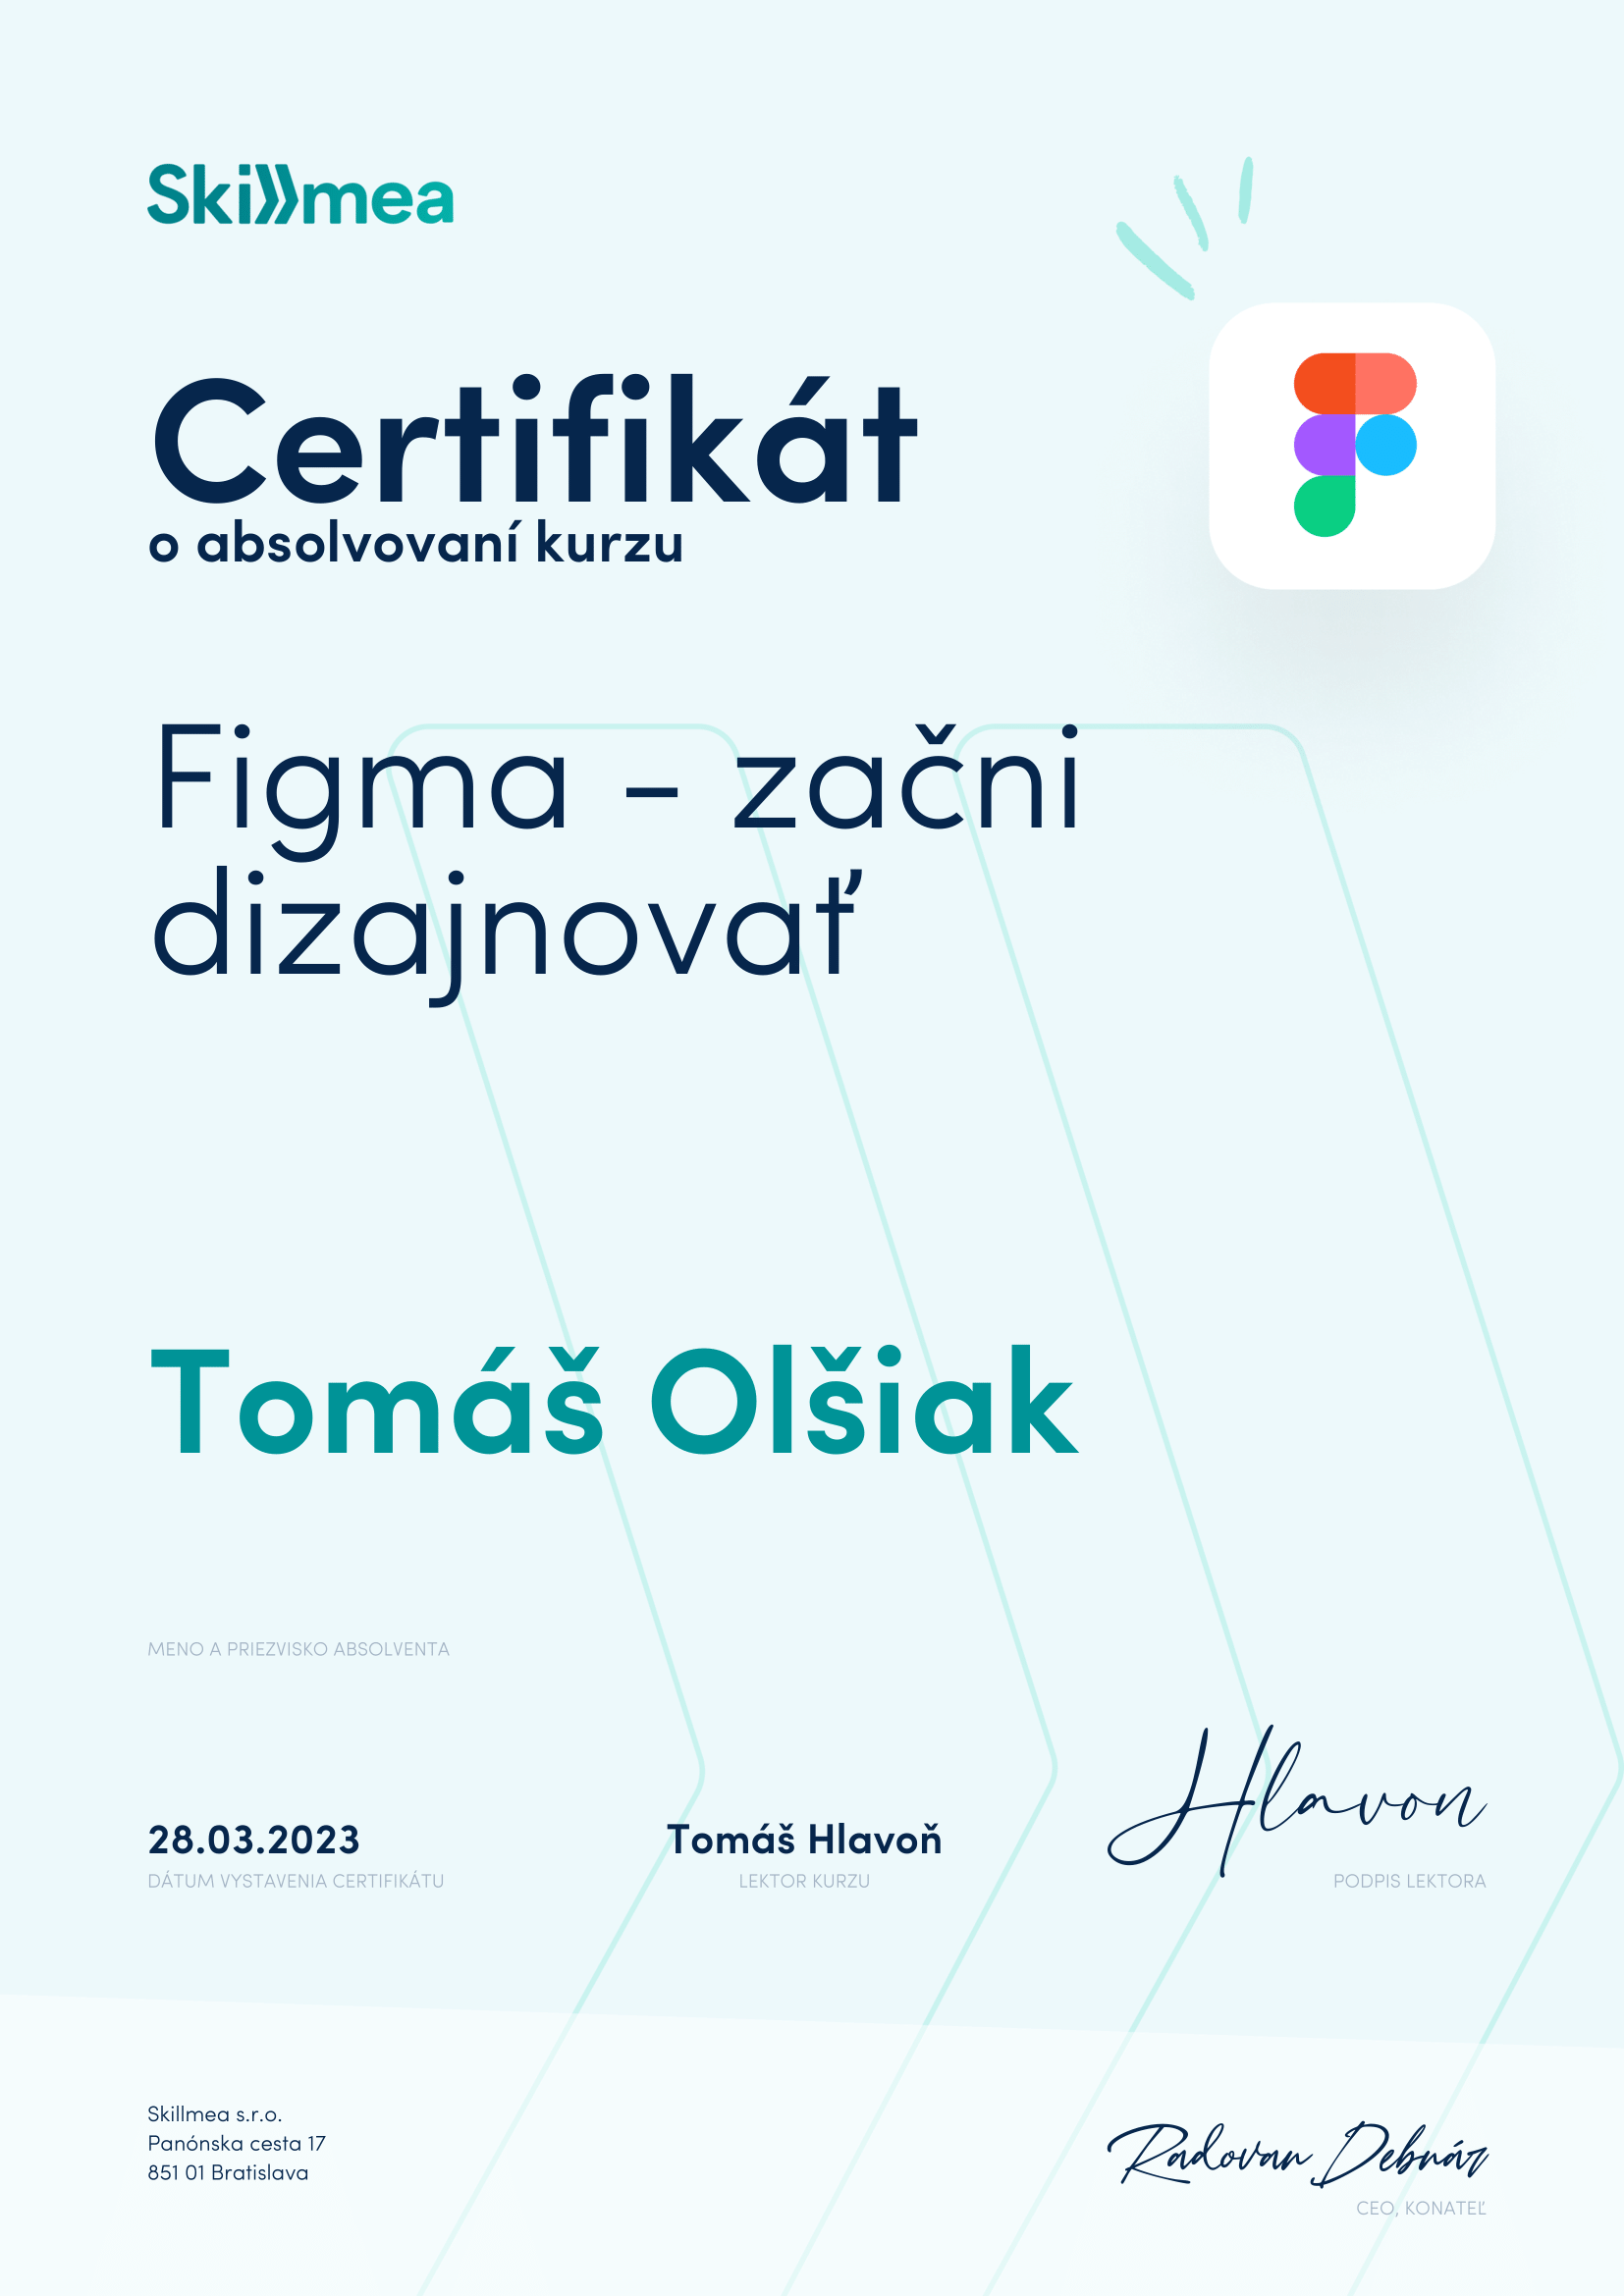 photo of my certificate for Figma